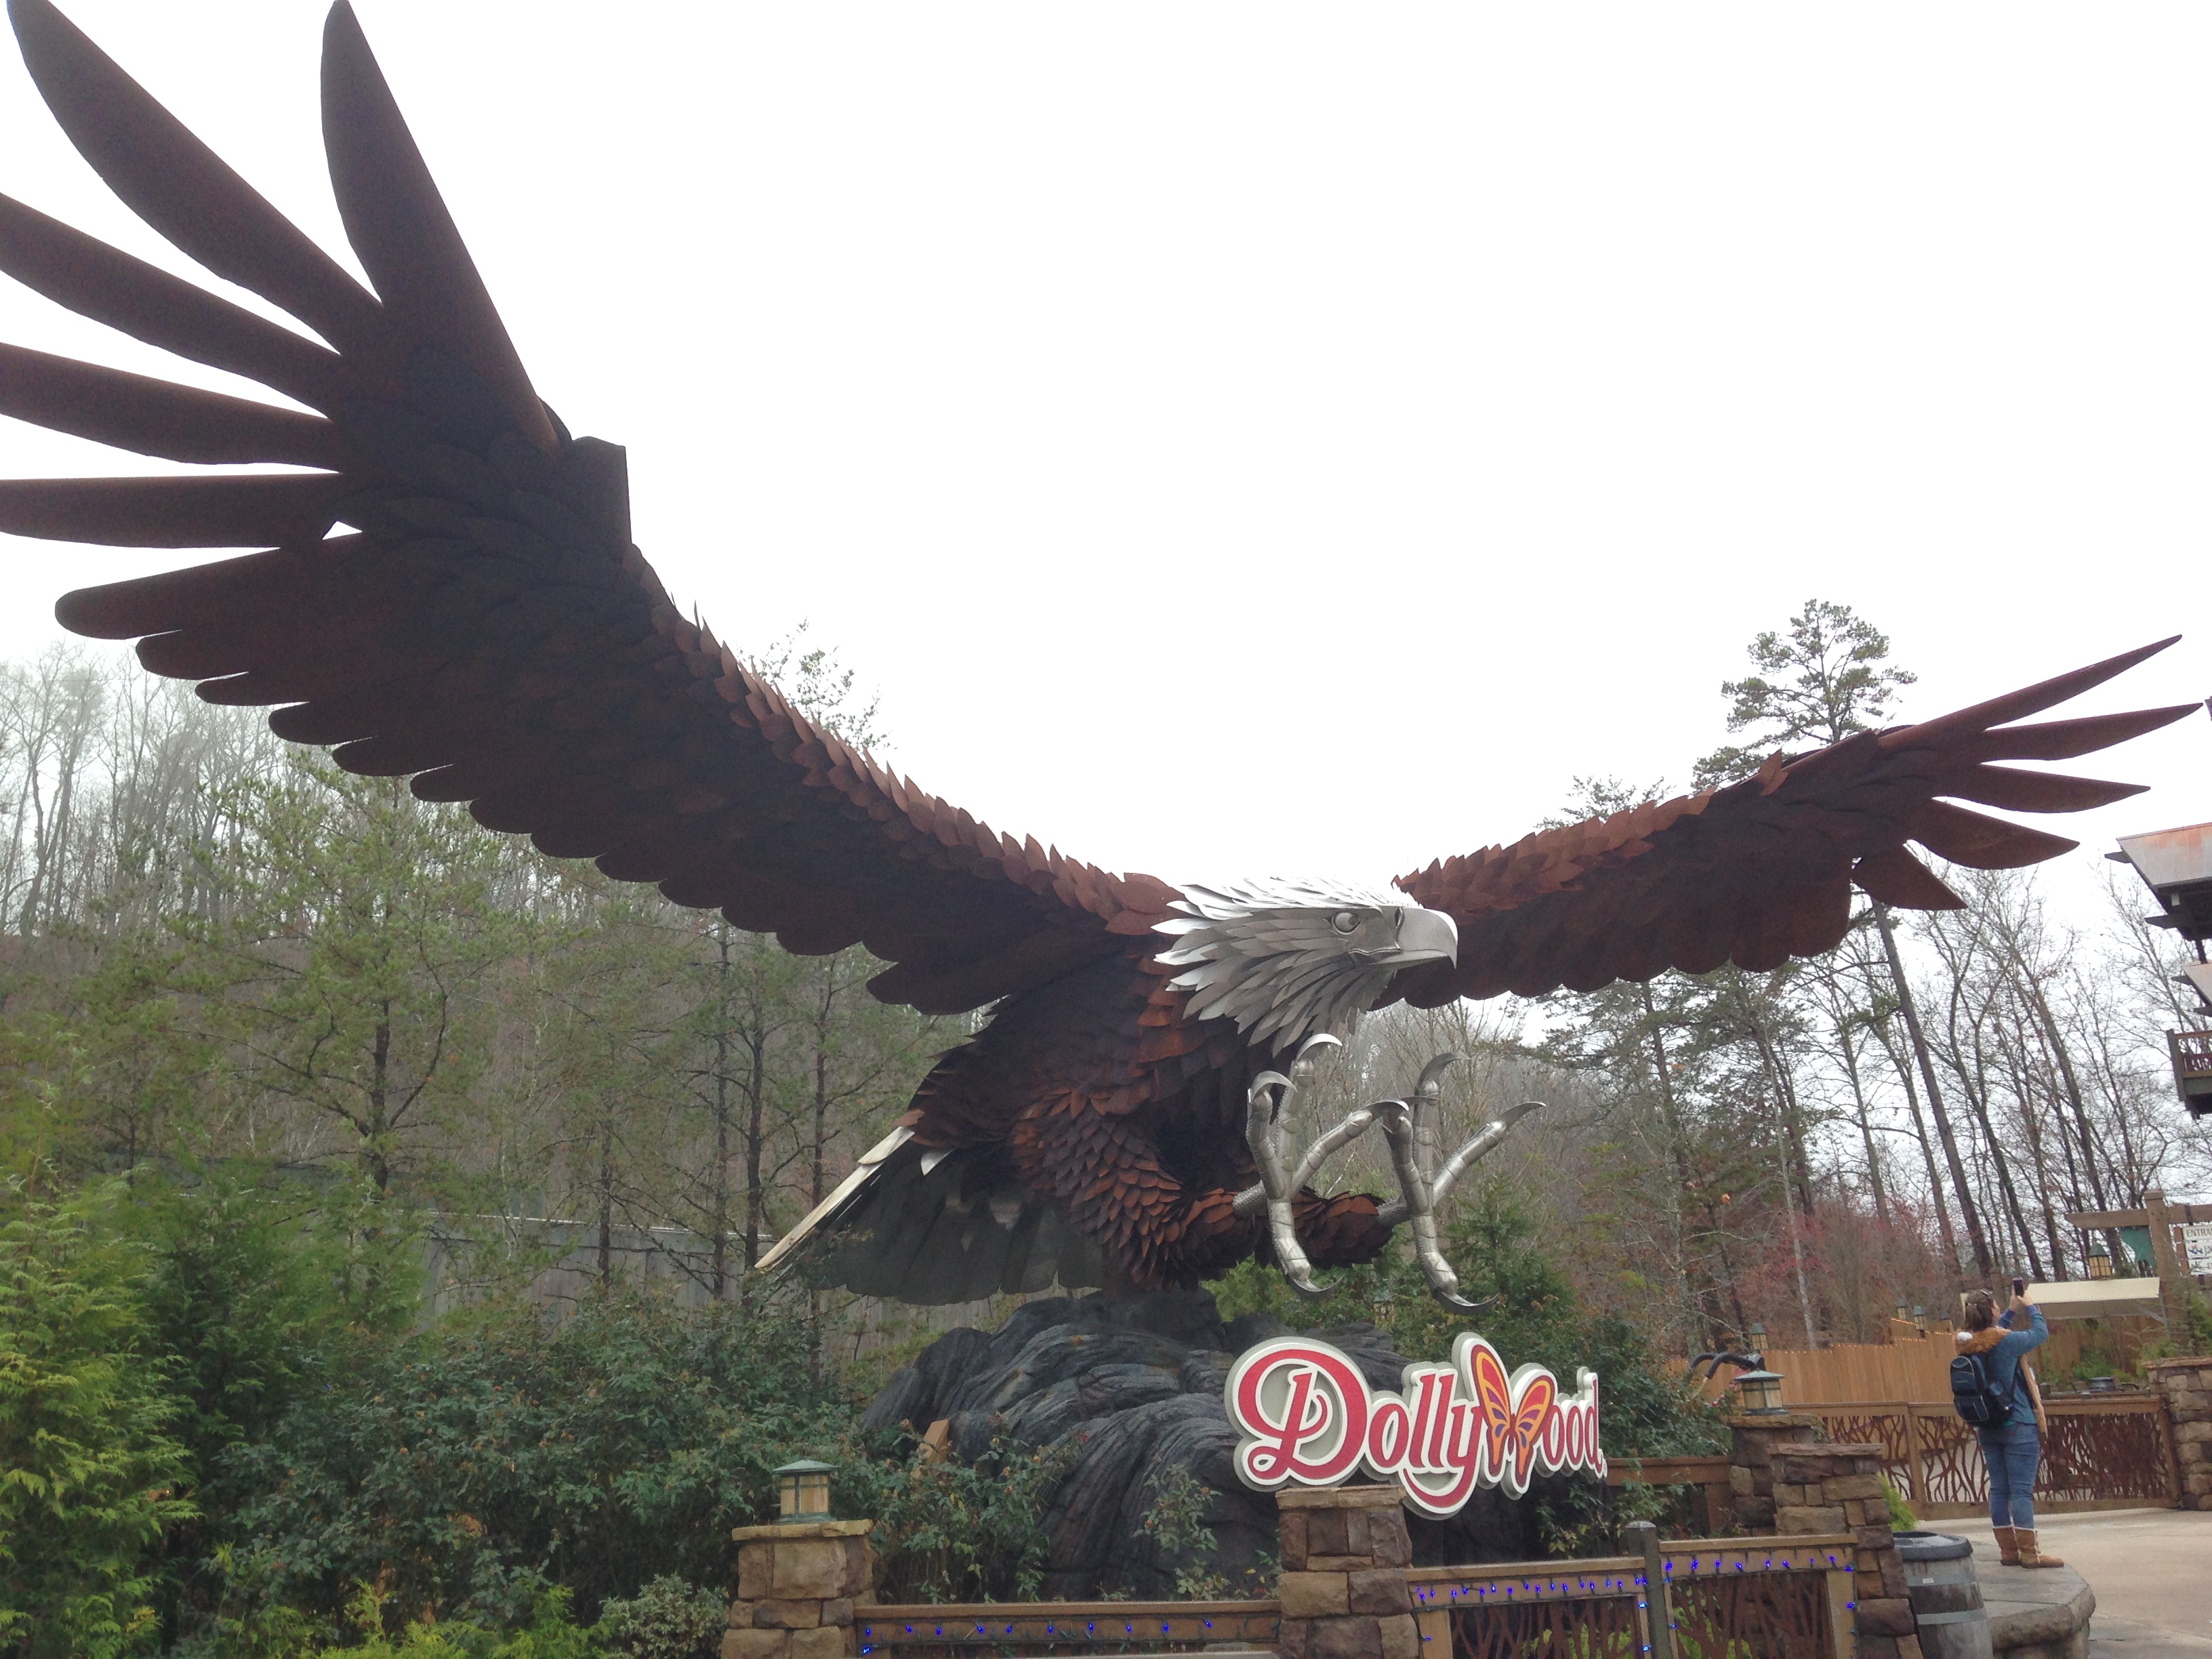 Dollywood - Wild Eagle - Pigeon Forge